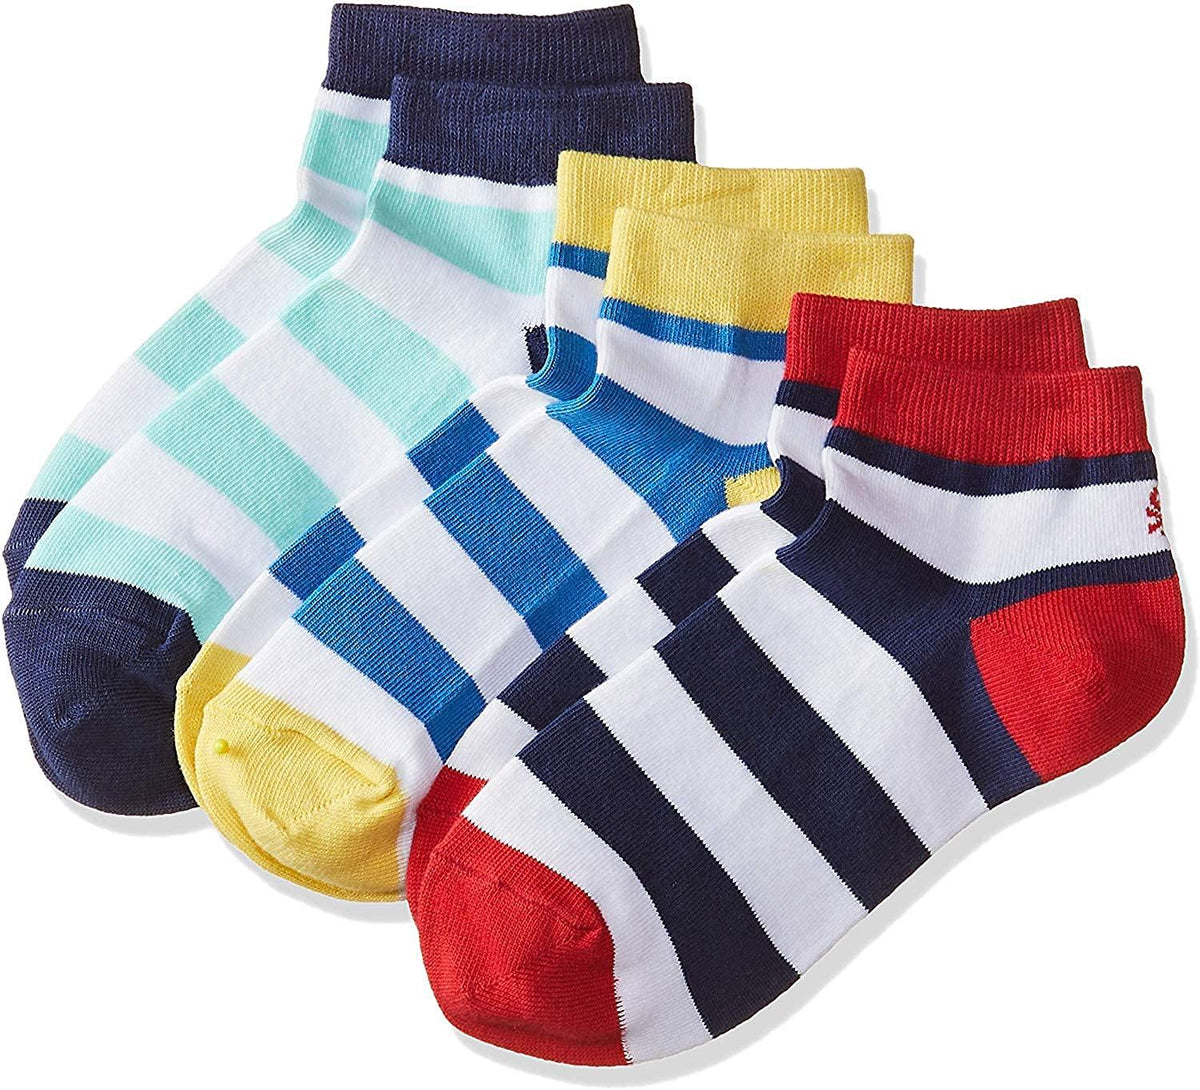 FOOTPRINTS Organic cotton Kids Socks -9-12 years - Pack of 3 Pairs - Low cut Colourful Stripes